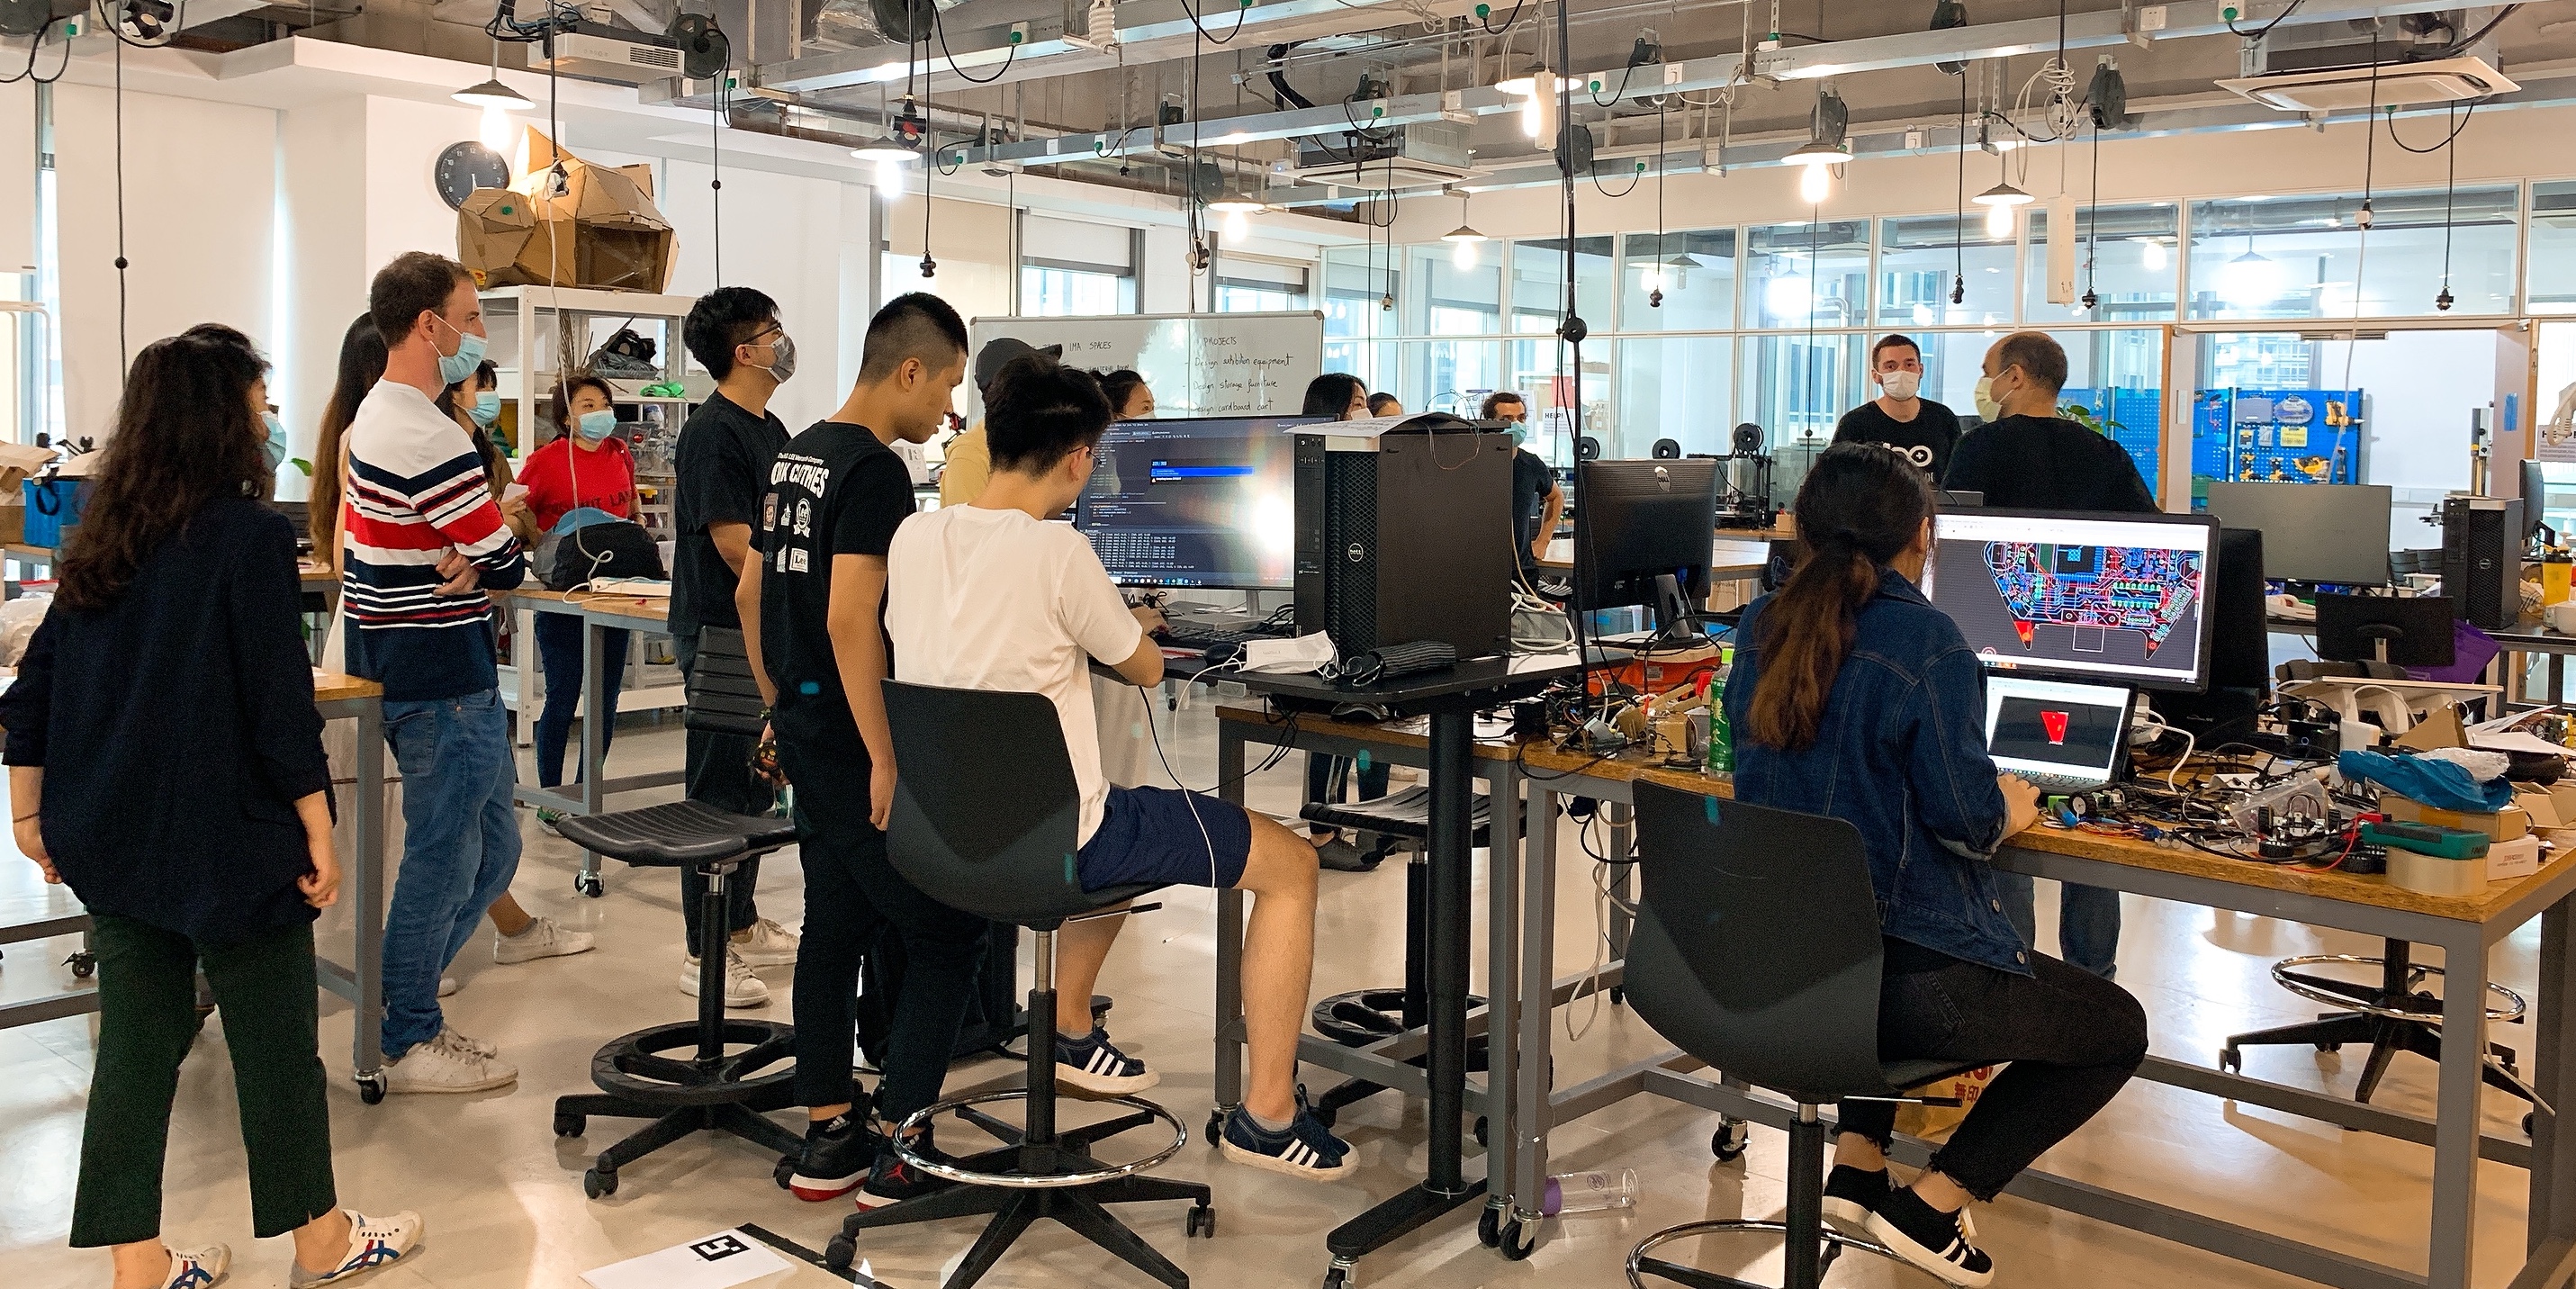 Students code and design on computer screens while professor leads others on tour